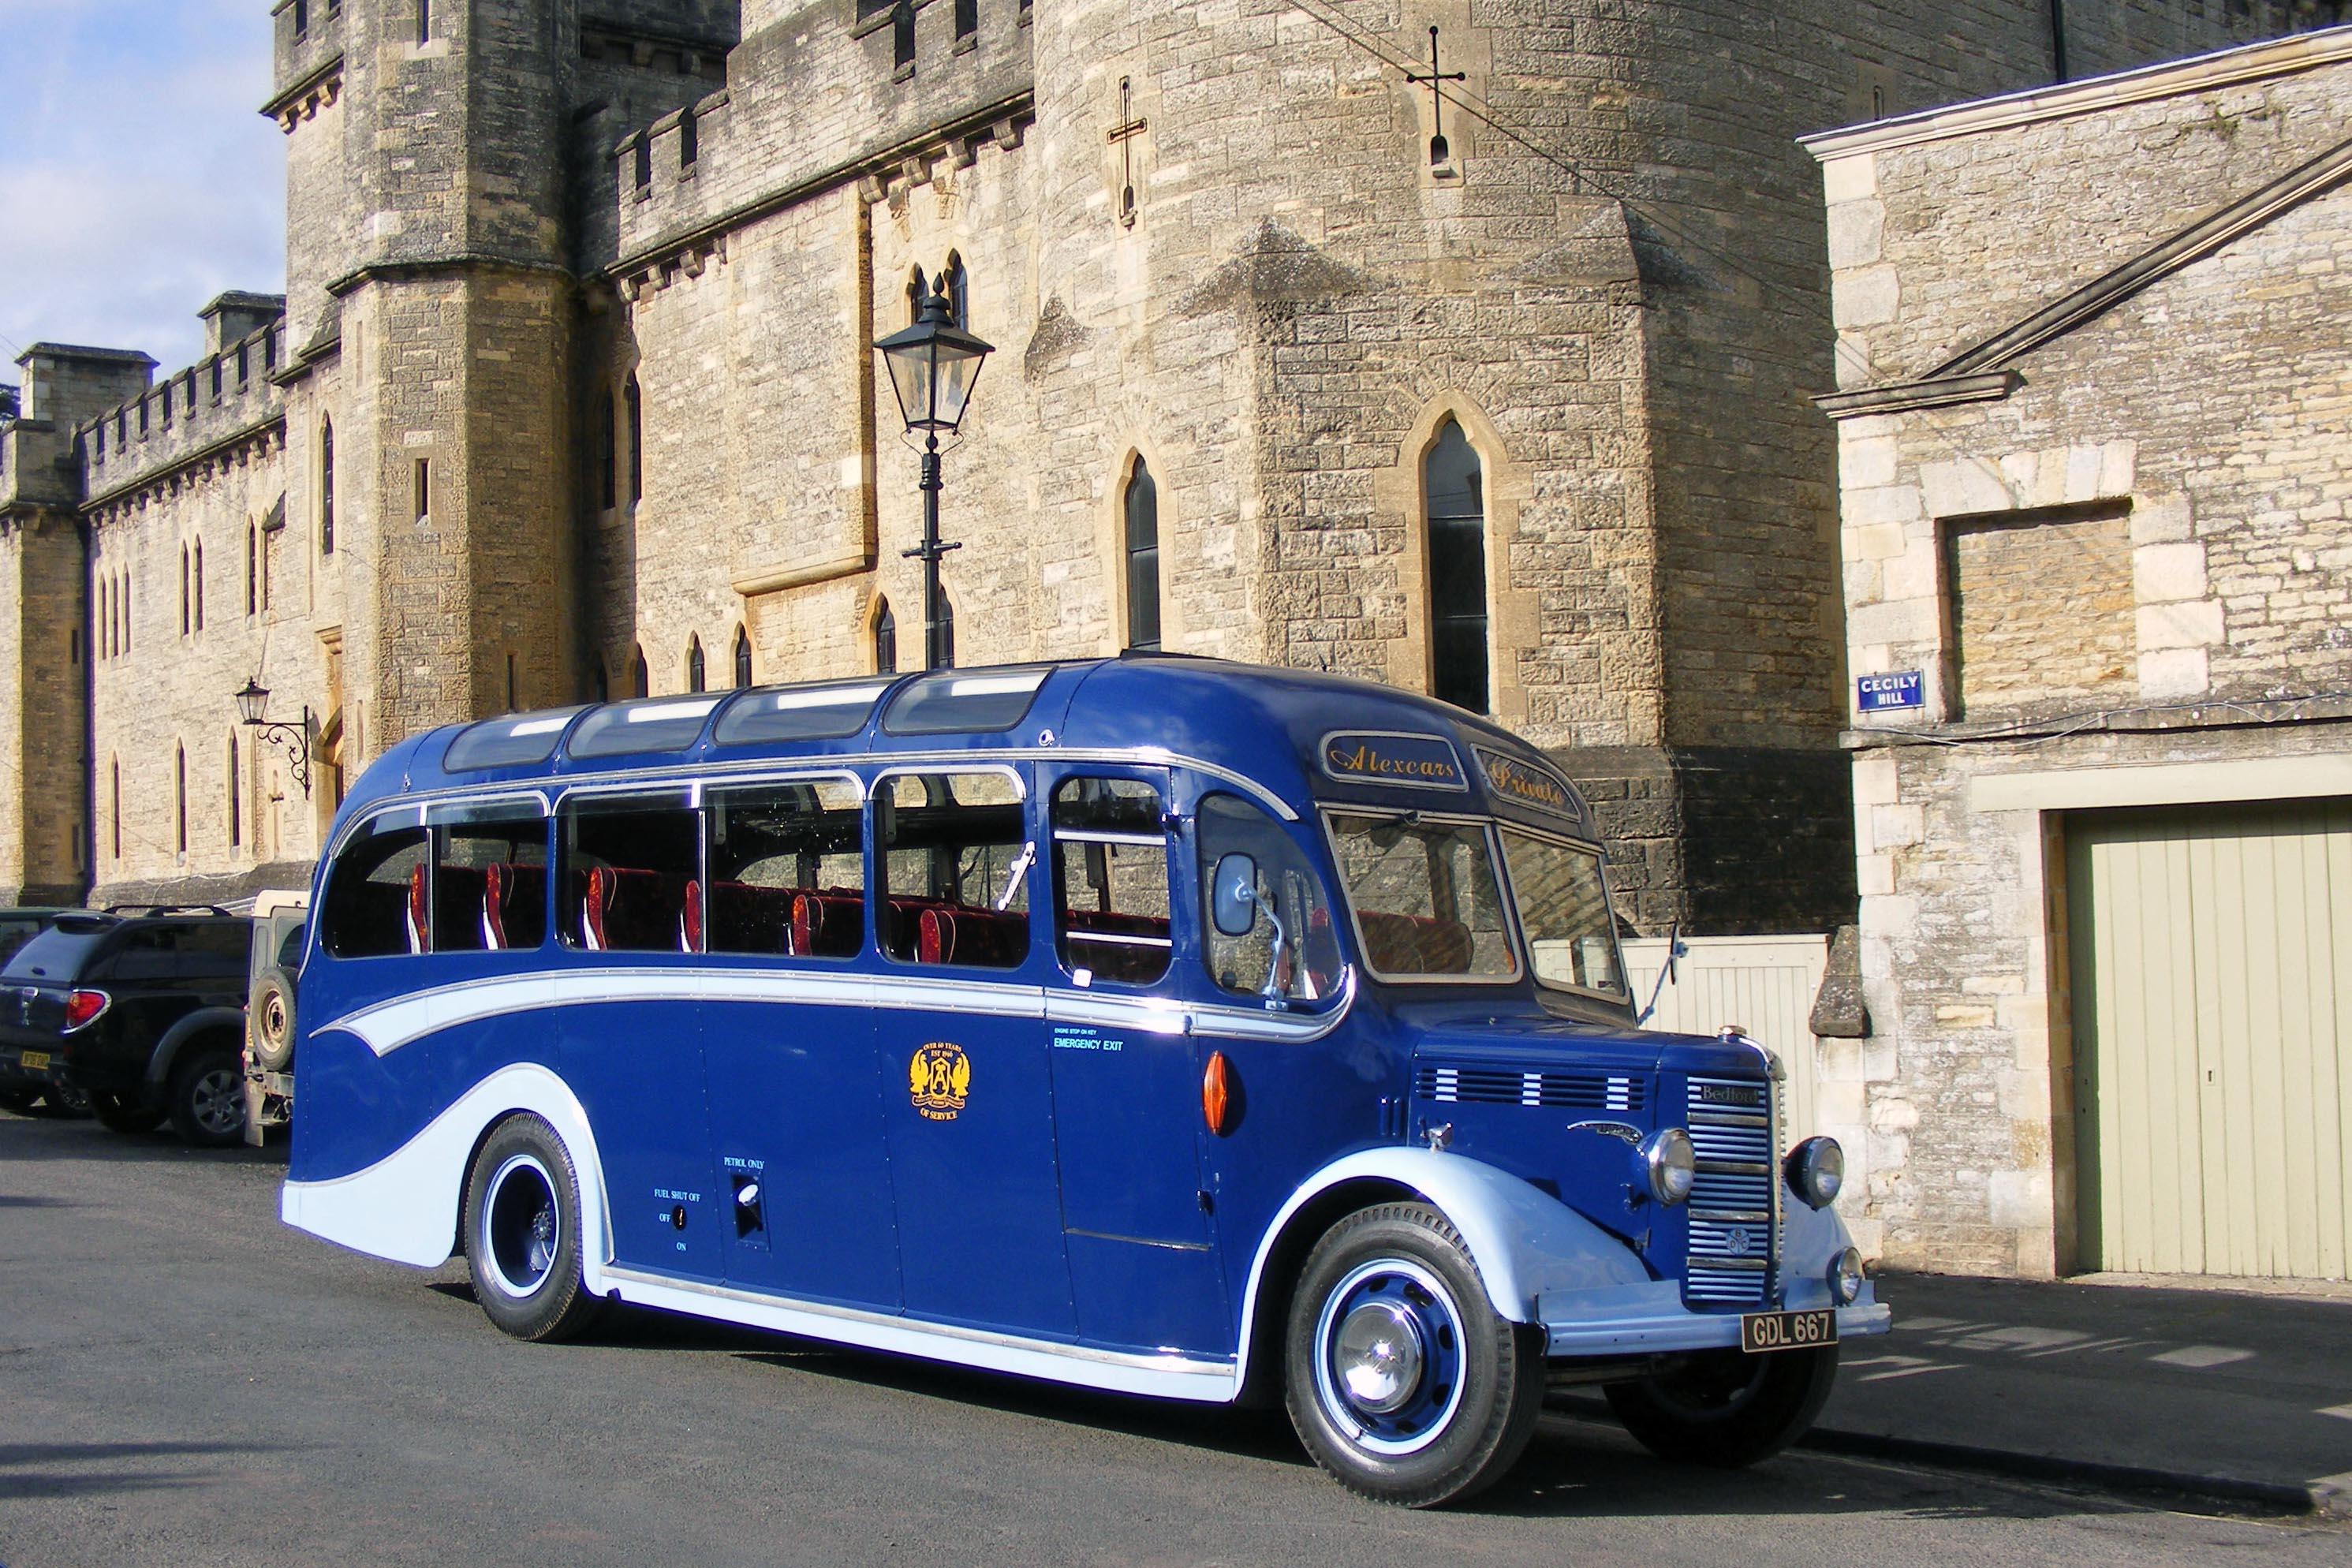 Old Babs, the Alexcars 1950s vintage bus